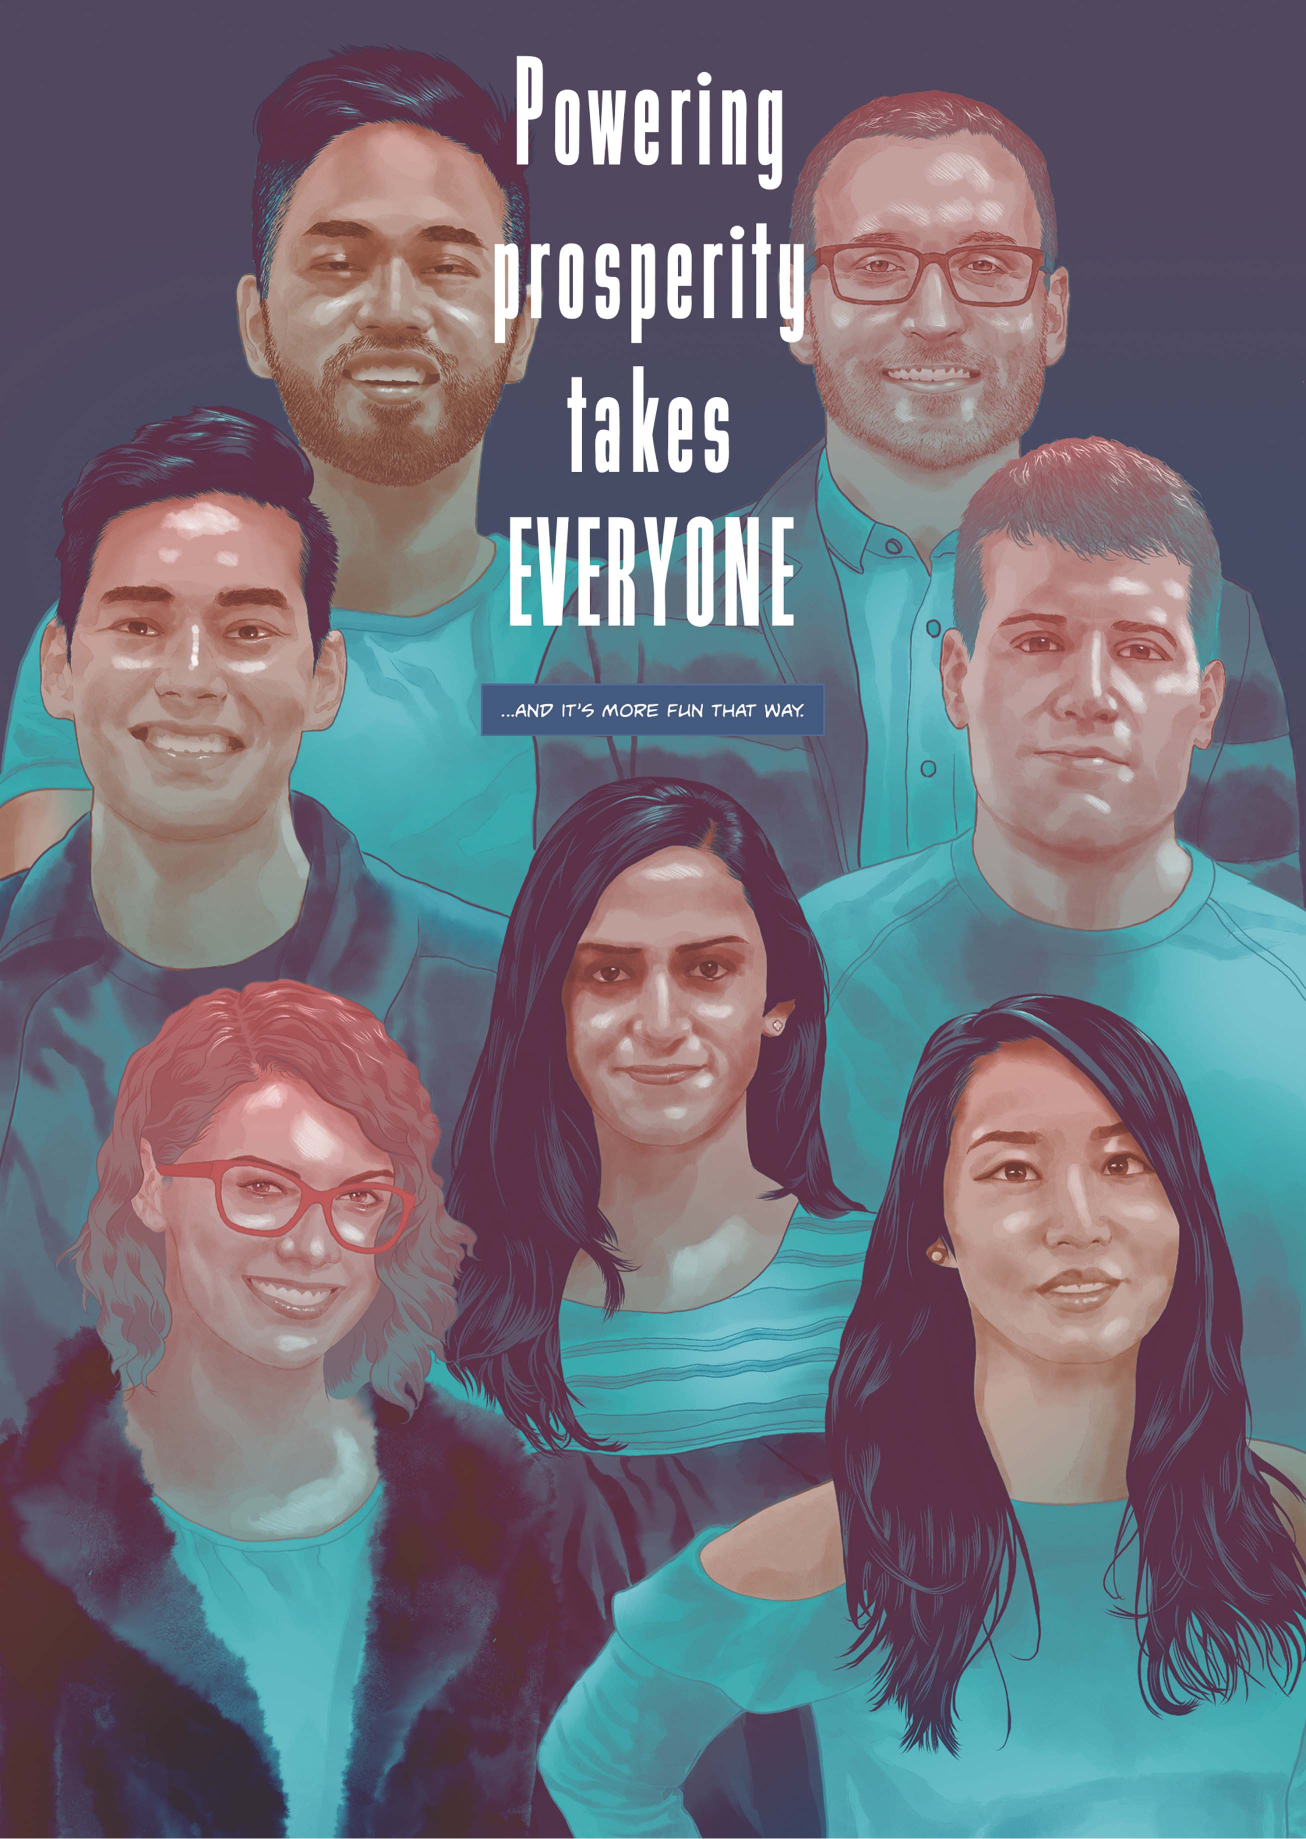 Illustration of 7 diverse people smiling, with the text 